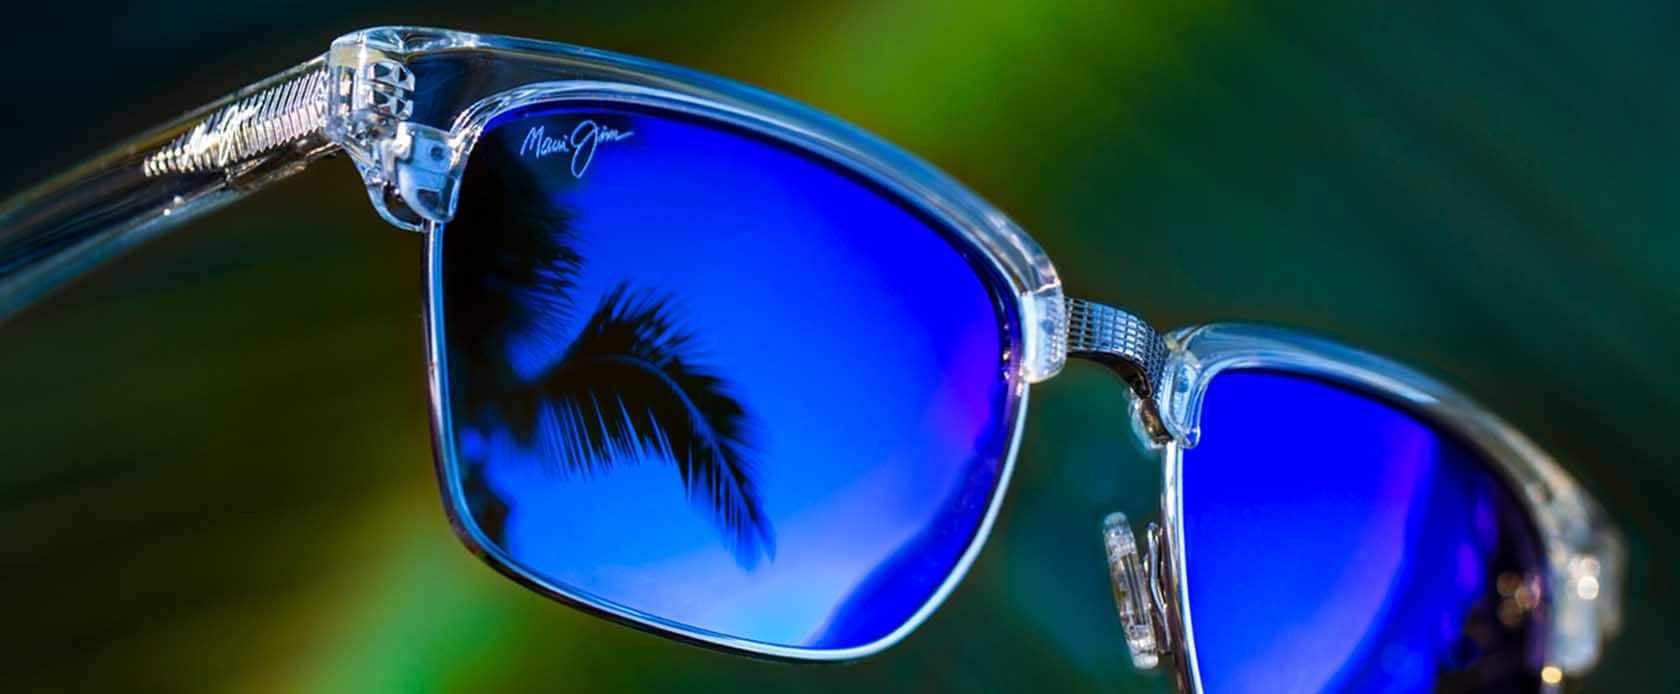 The Best Way to Clean Maui Jim Sunglasses